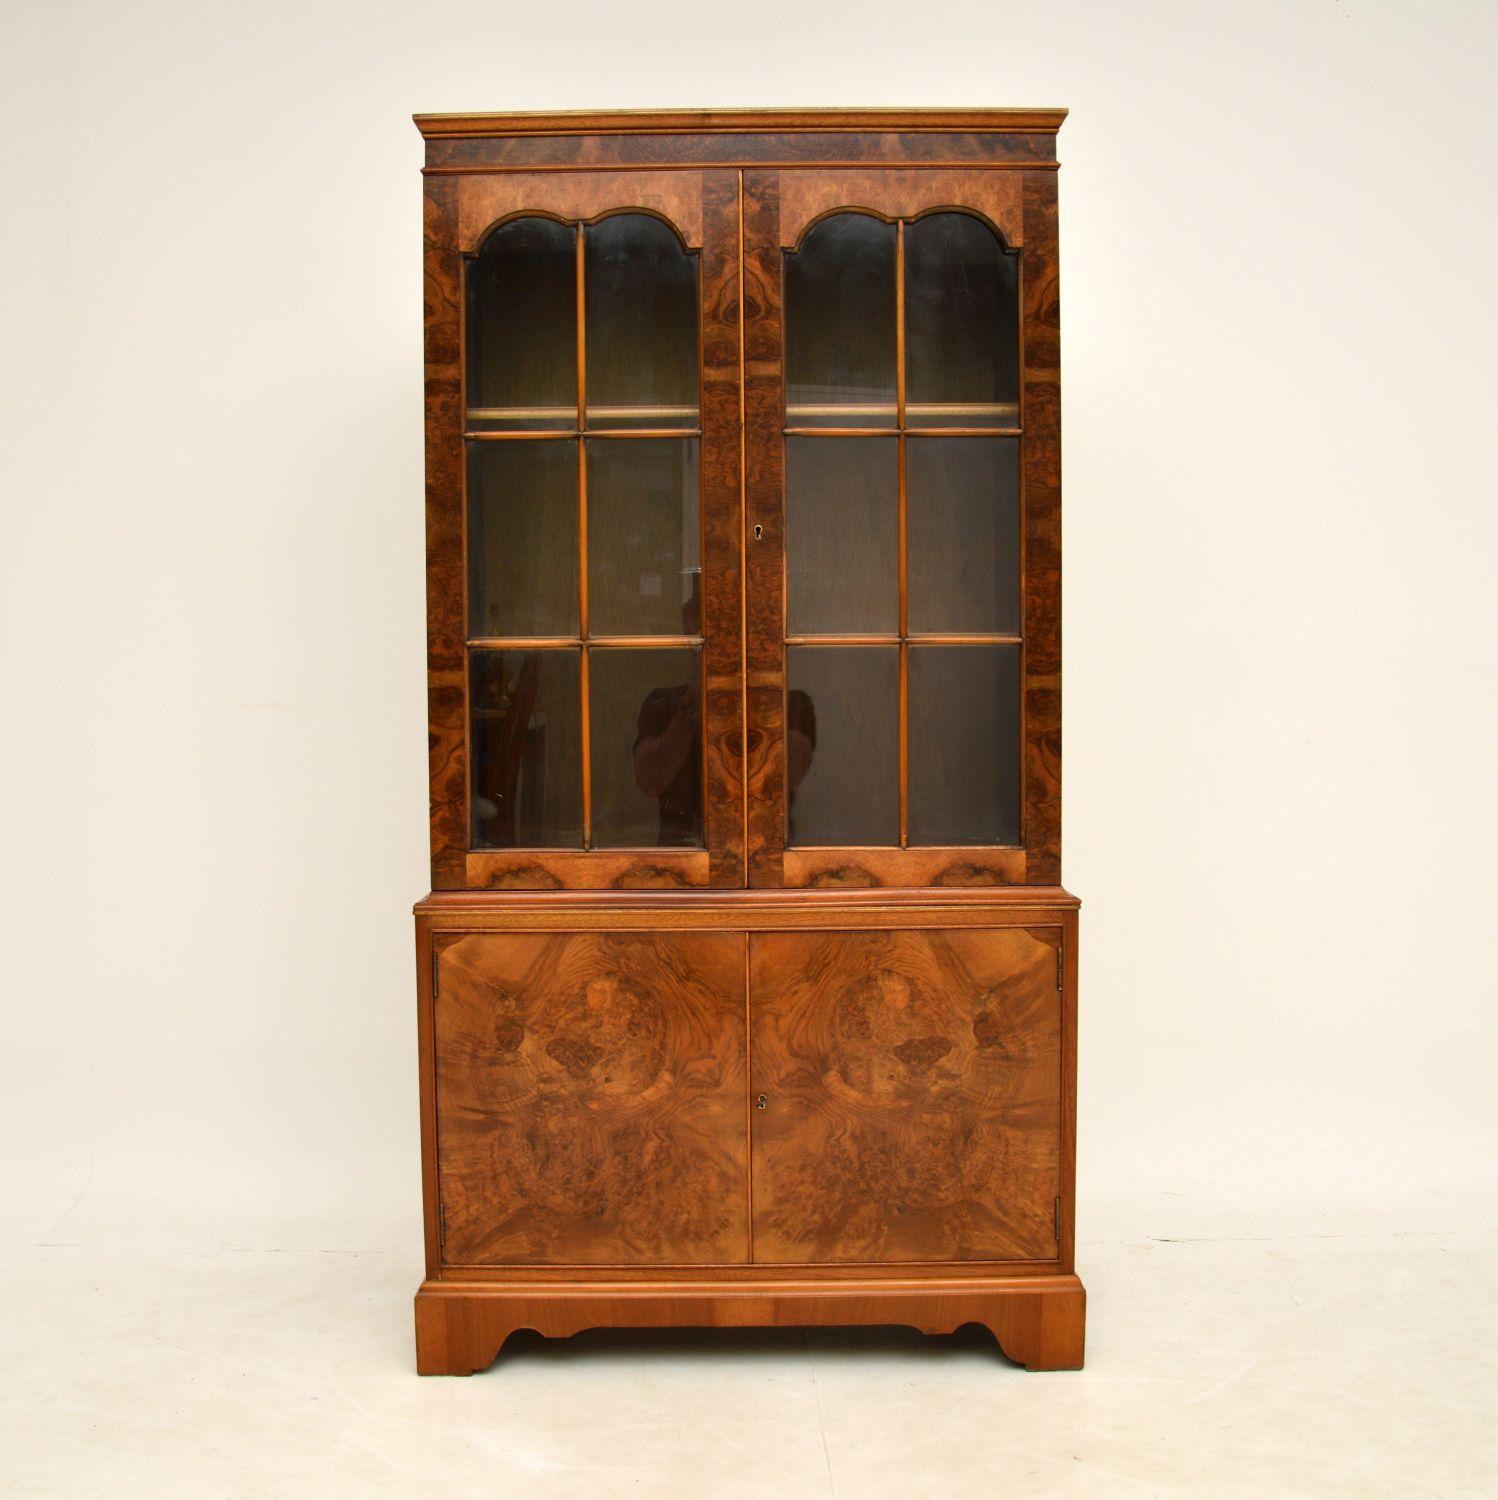 A beautiful and very useful burr walnut bookcase in the antique Georgian style, made in England & dating from around the 1930’s period.

The top section has two shelves behind astral-glazed doors & the bottom section is a little deeper, with loads